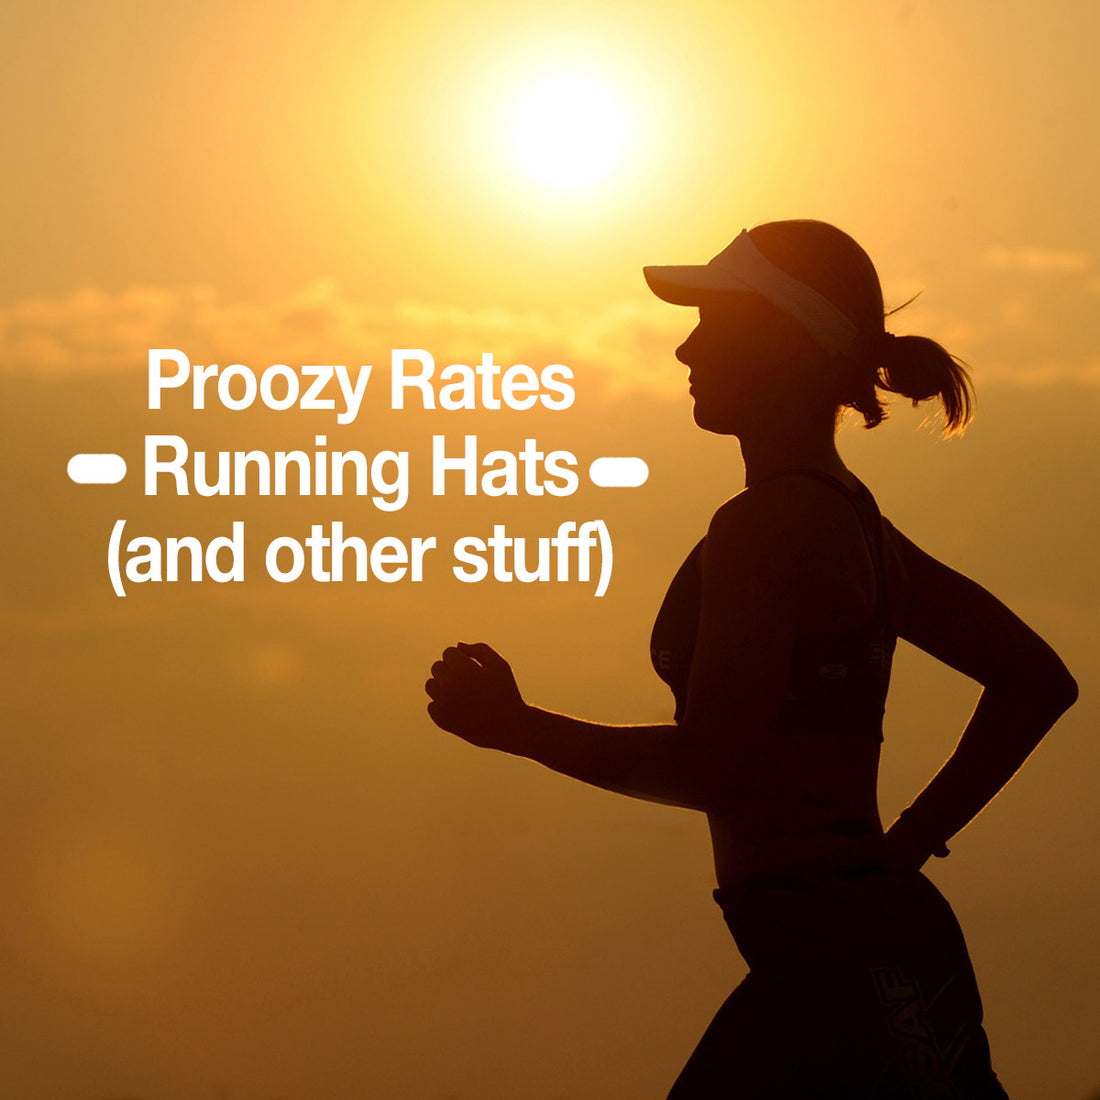 We Rate Running Hats (and stuff) - PROOZY